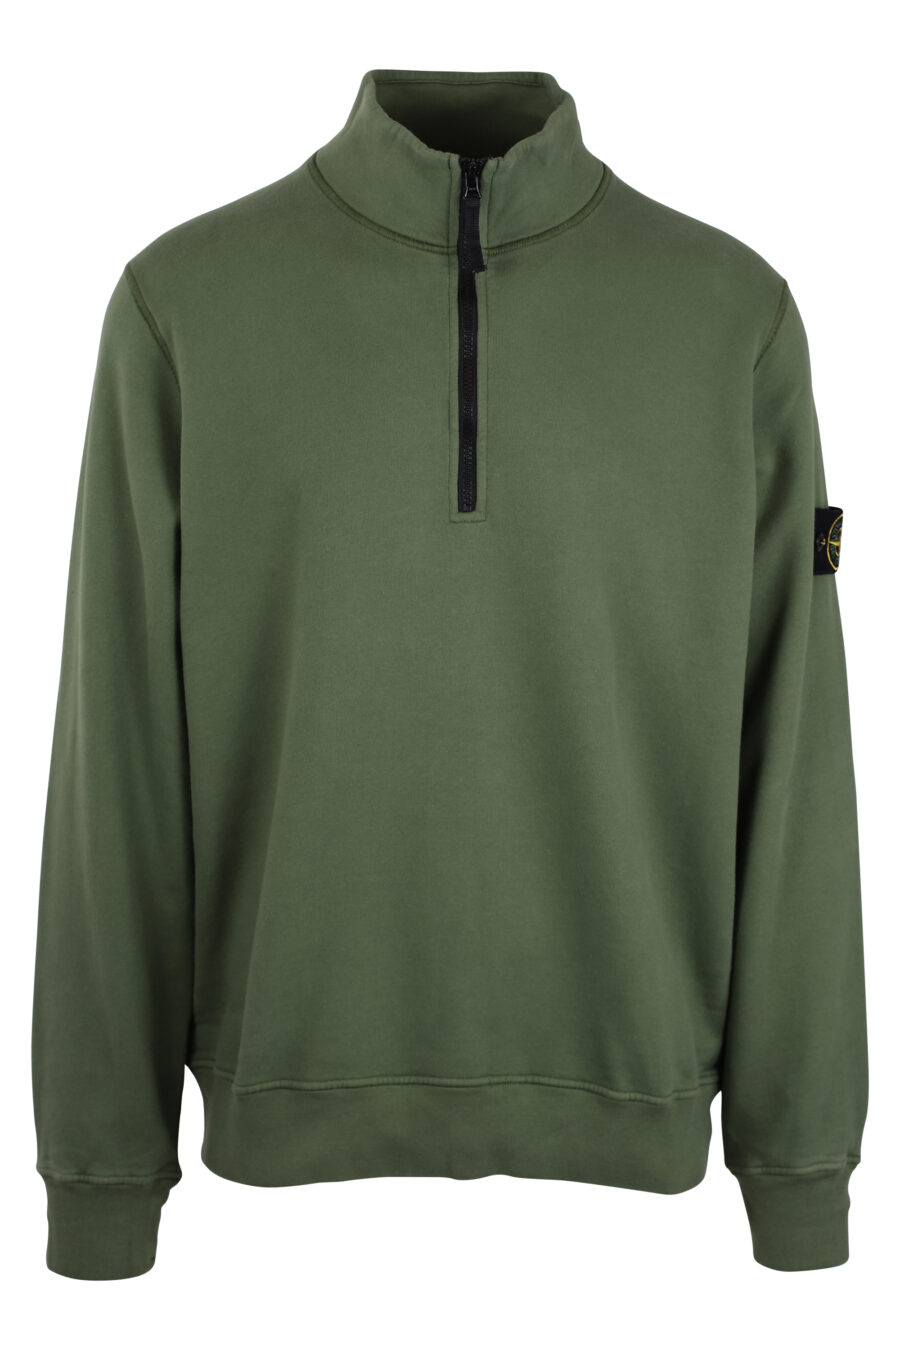 Military green sweatshirt with short zip and patch - IMG 4351